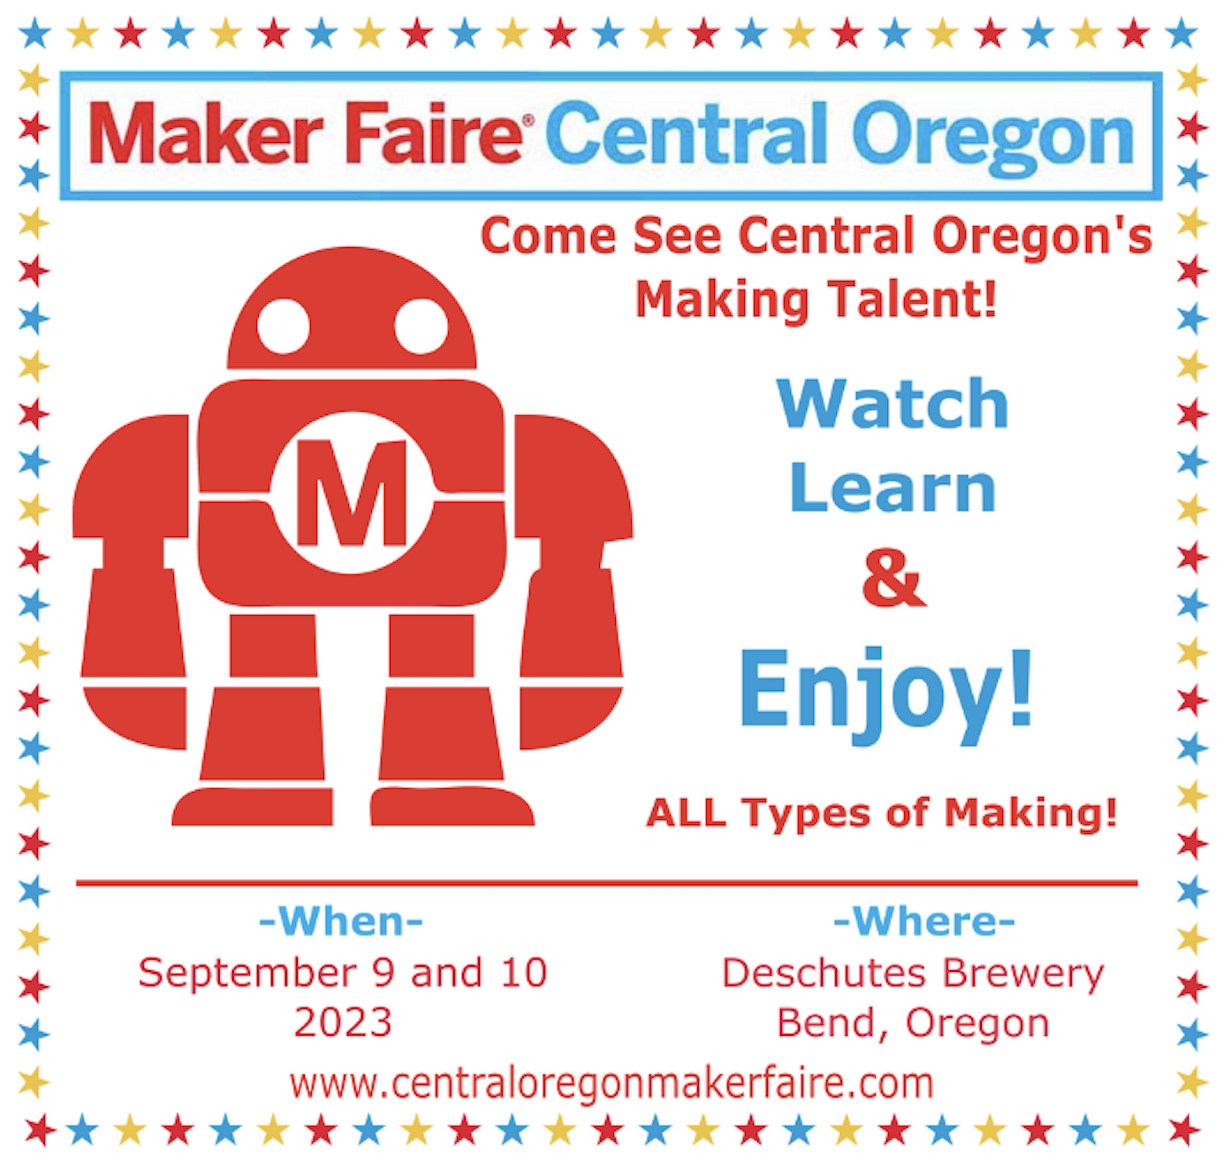 A flyer with a border of red, blue, and yellow stars. The title reads Maker Faire Central Oregon. Next to a Red Robot with an M on its chest are the event details: Where Deschutes Brewery When: September 9 and 10, 2023 https://centraloregon.makerfaire.com/